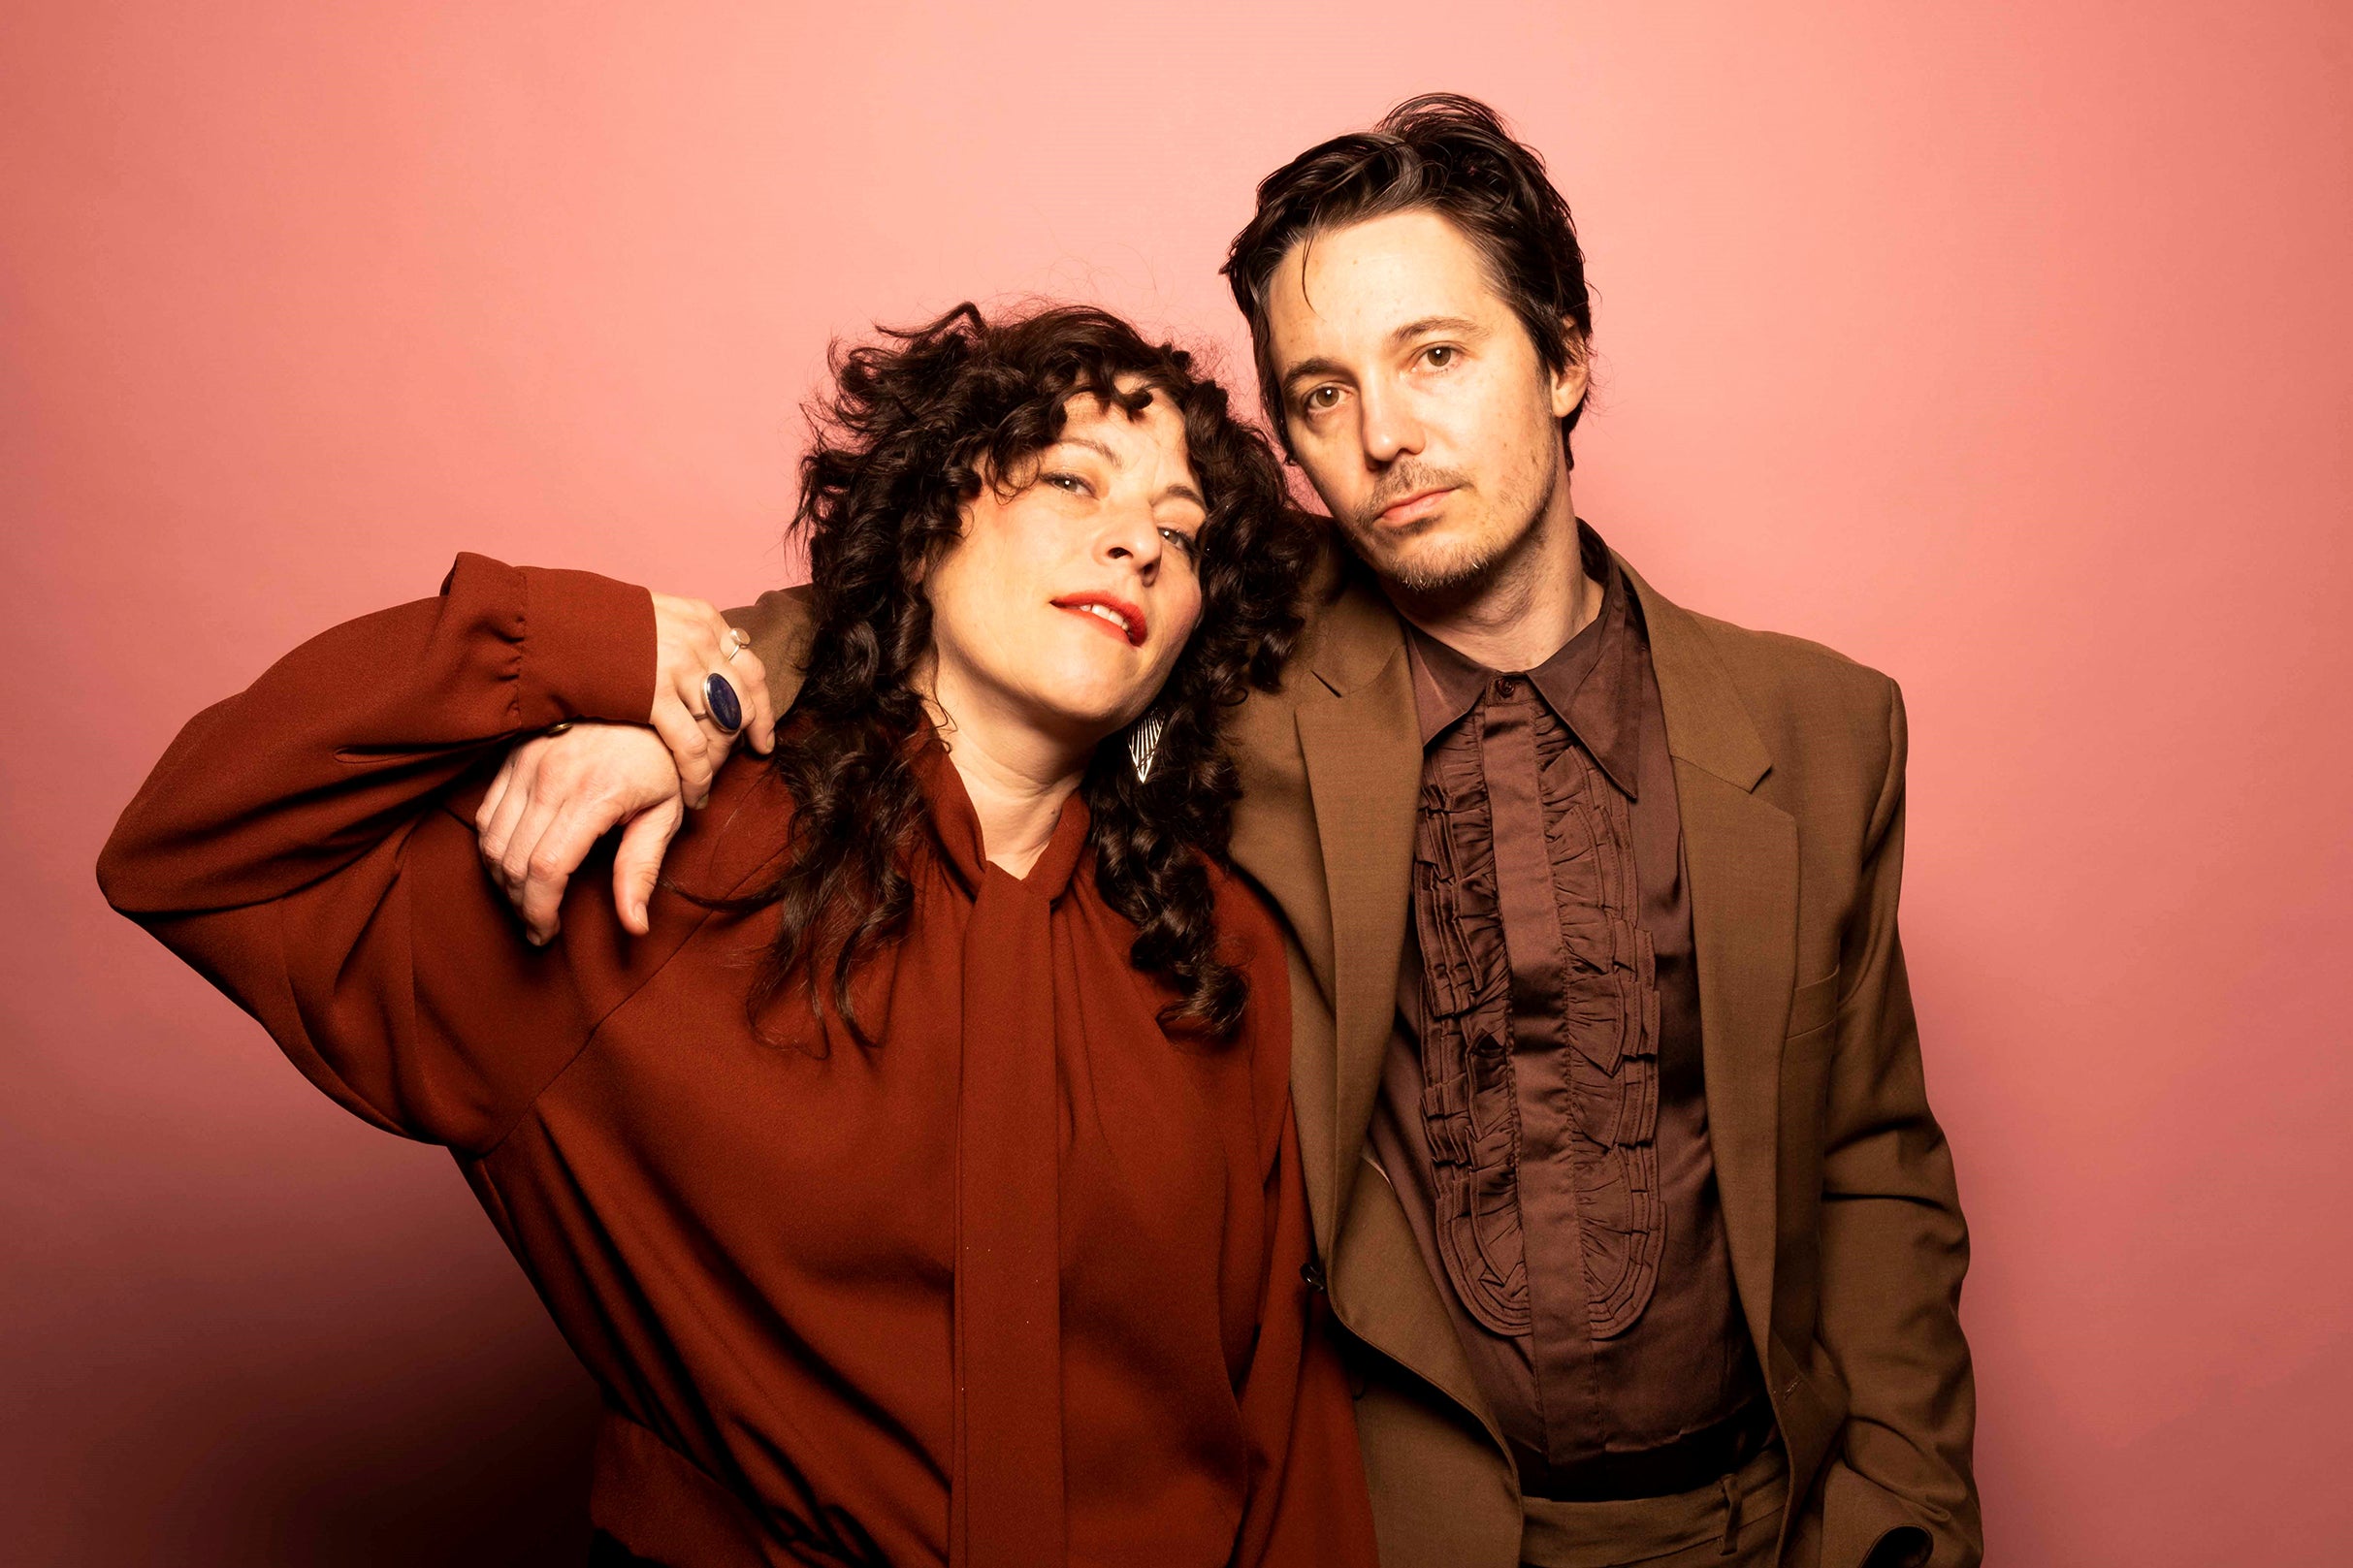 Shovels & Rope in Columbus promo photo for 'By Blood' Pre-Show Experience presale offer code